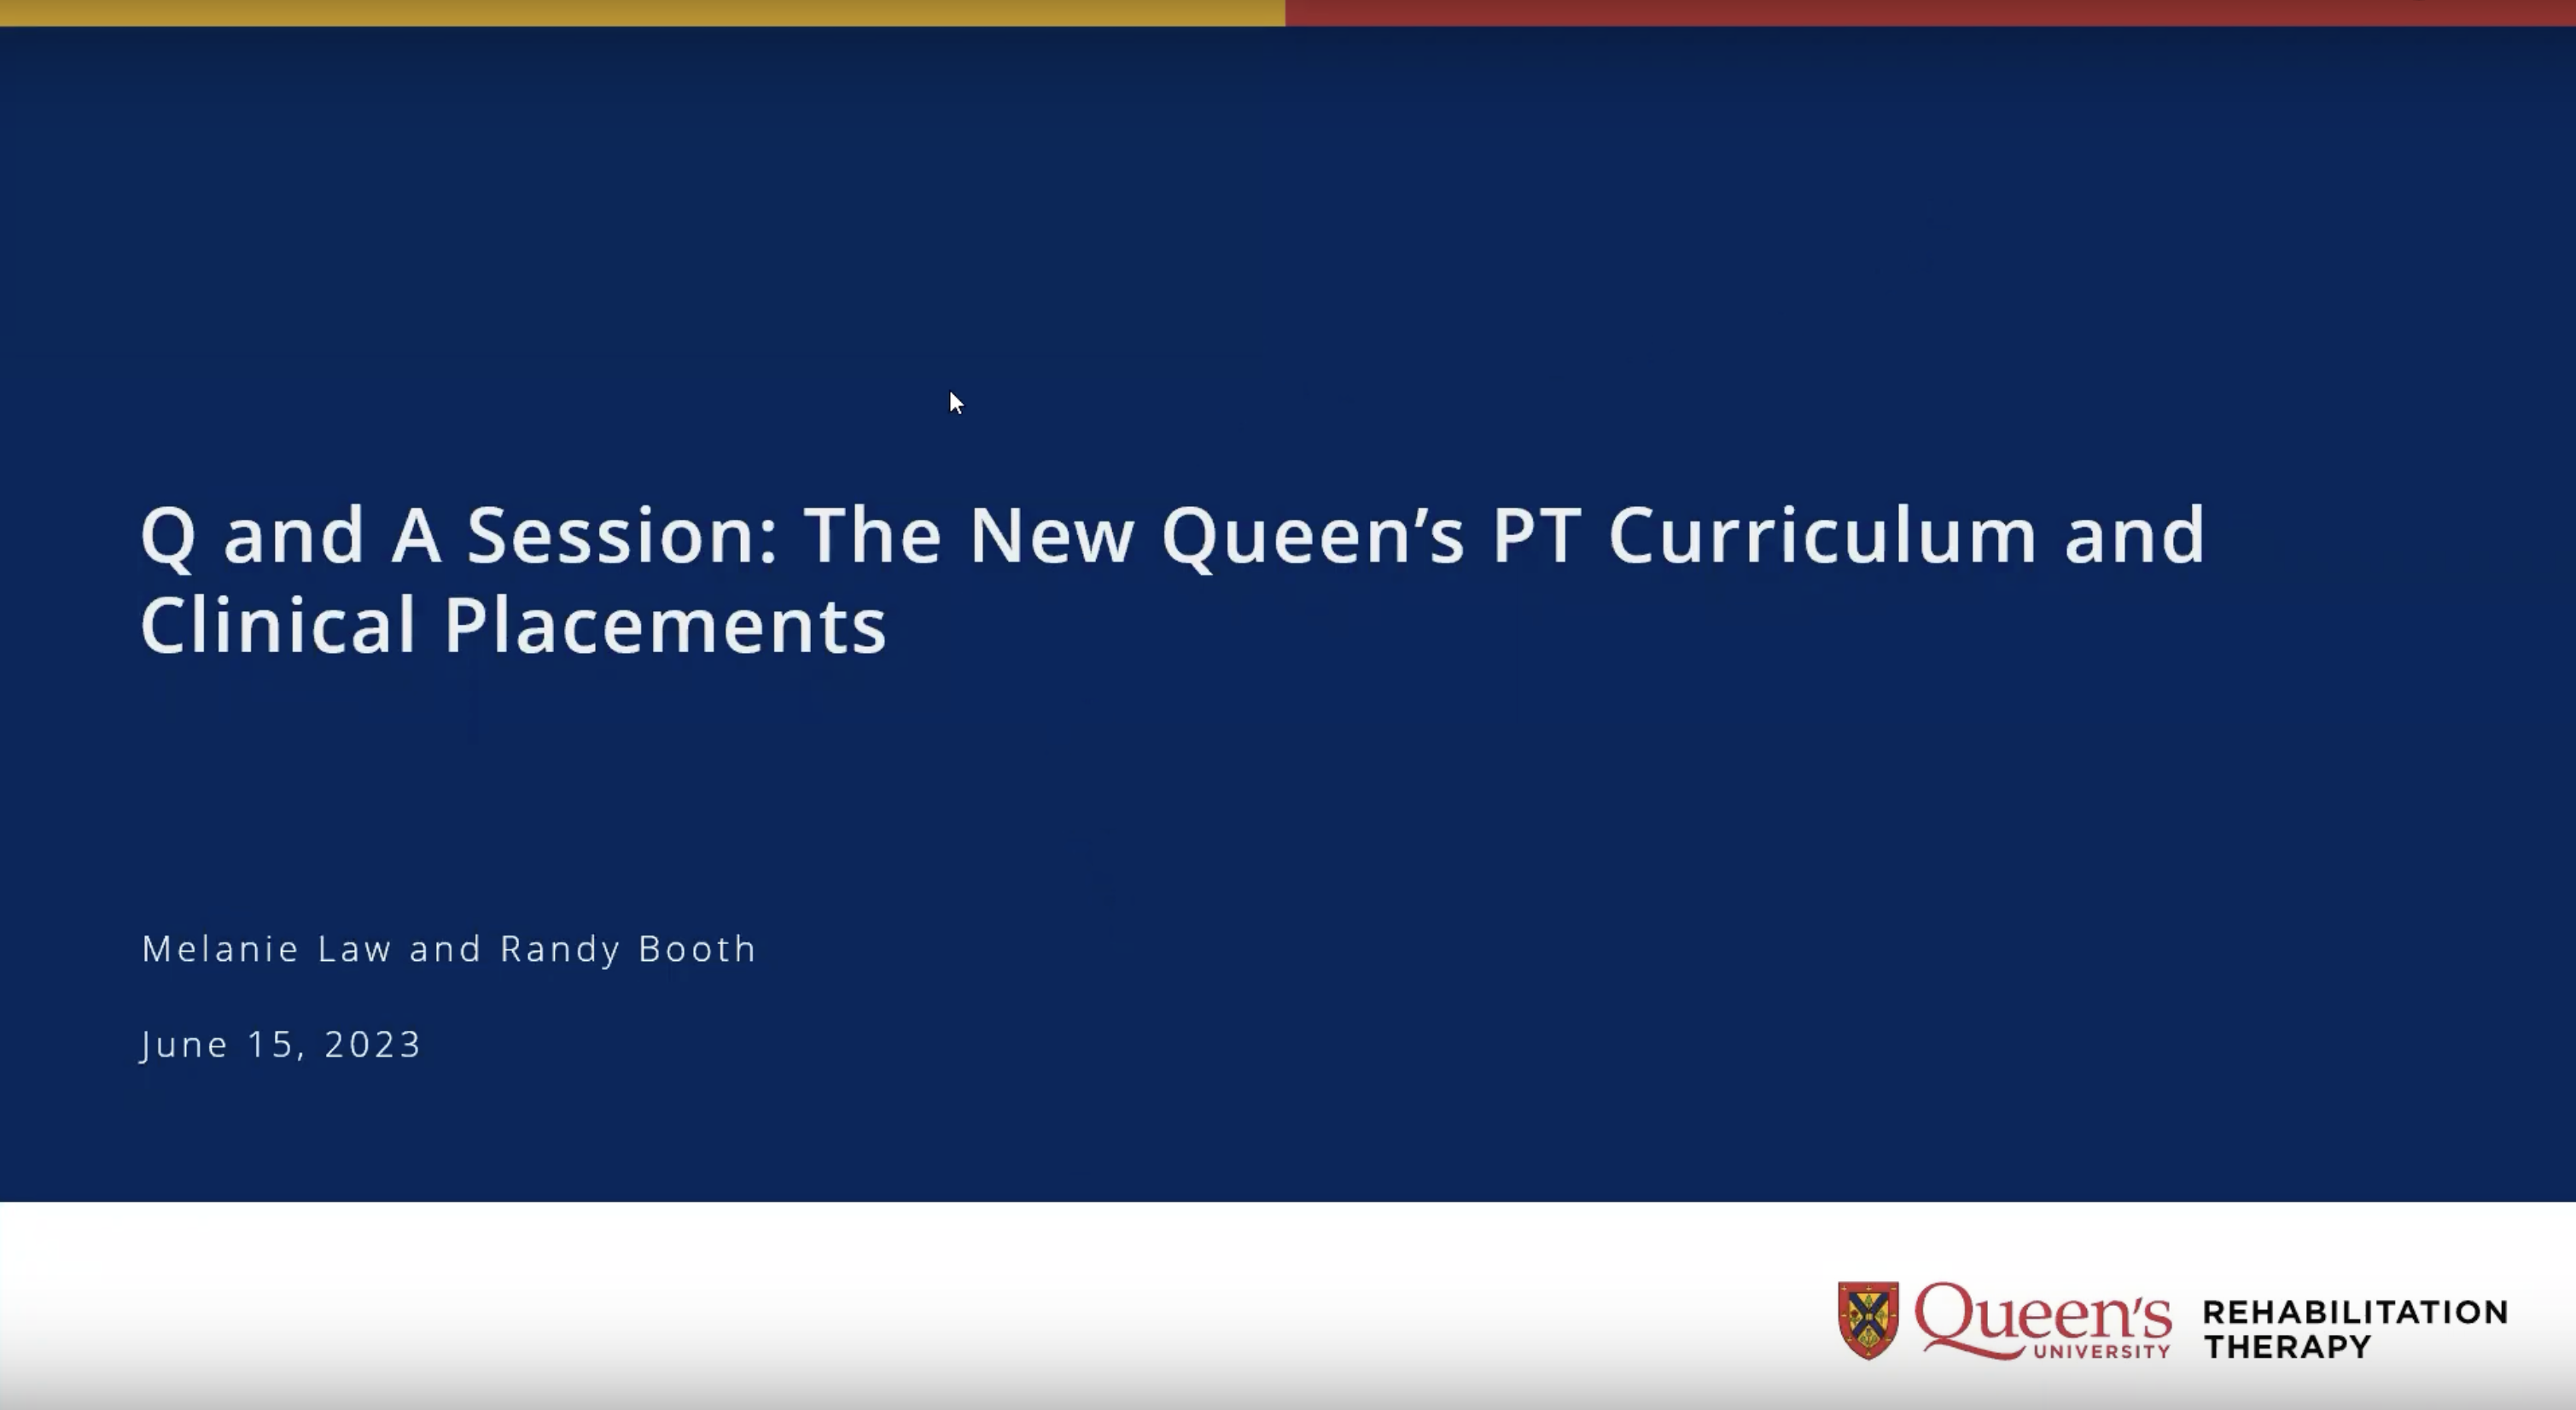 The New Queen's PT Curriculum and Clinical Placements